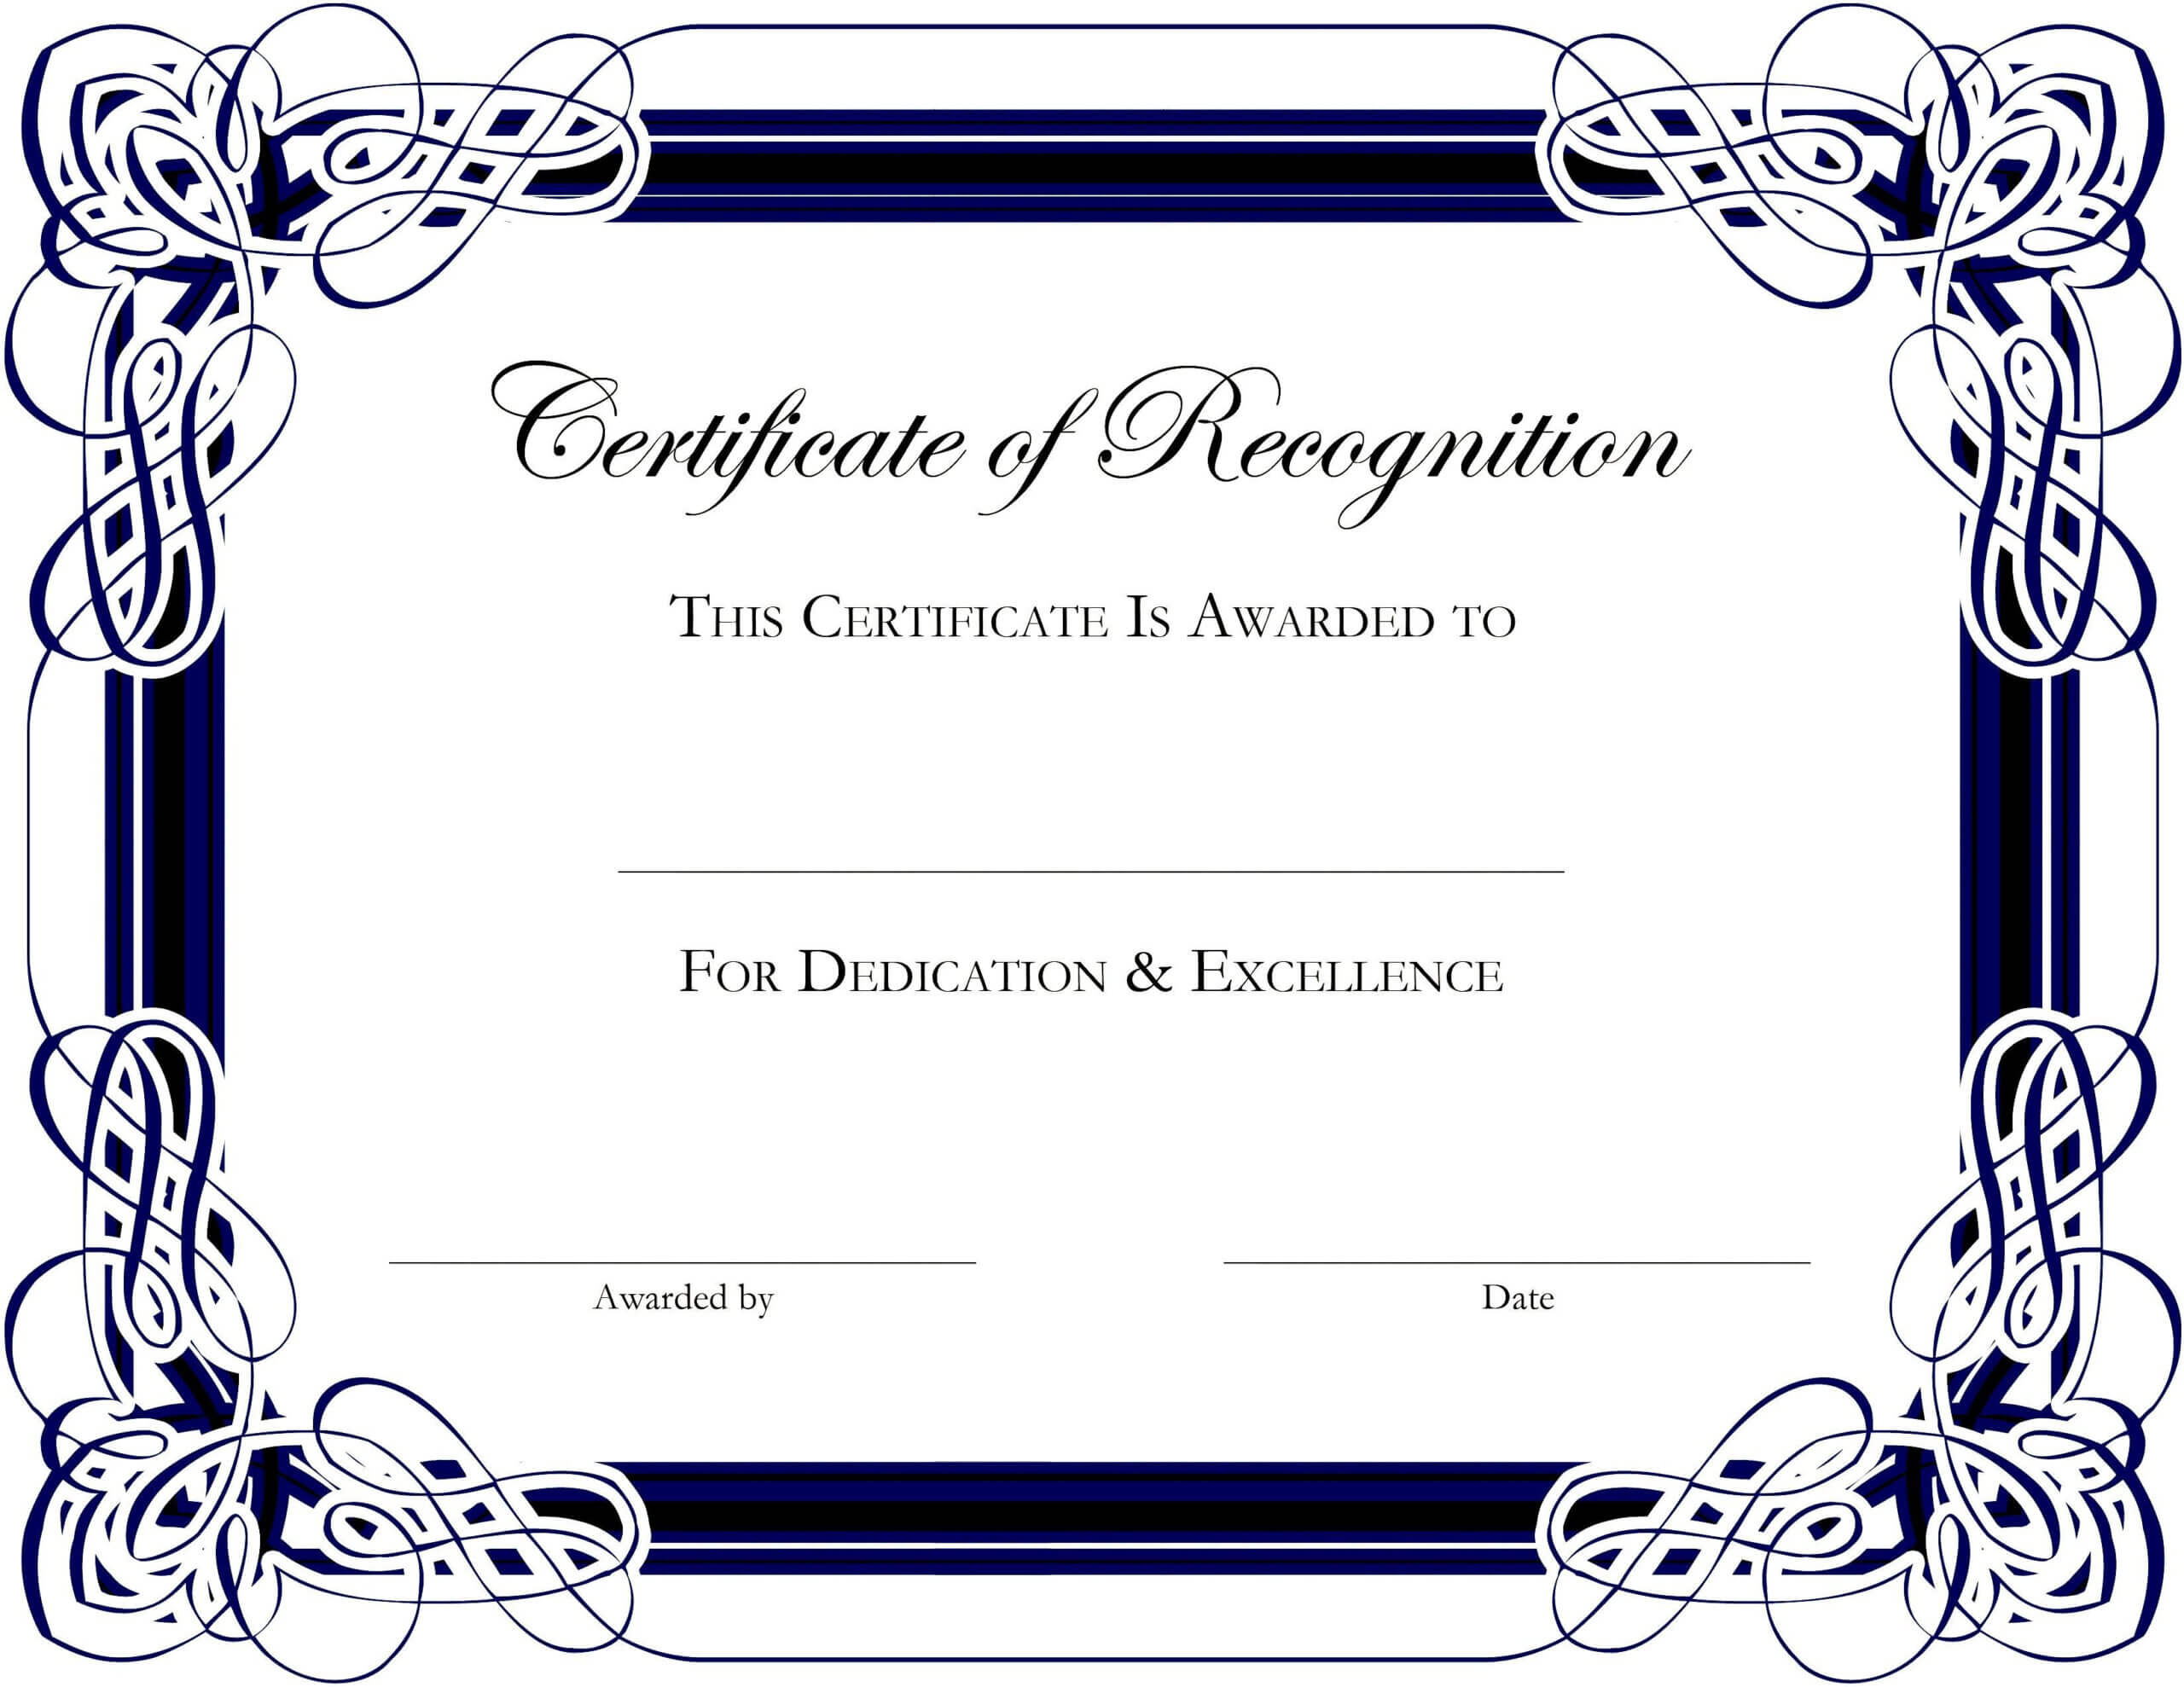 Award Templates For Microsoft Publisher | Besttemplate123 Throughout Certificate Of Achievement Army Template